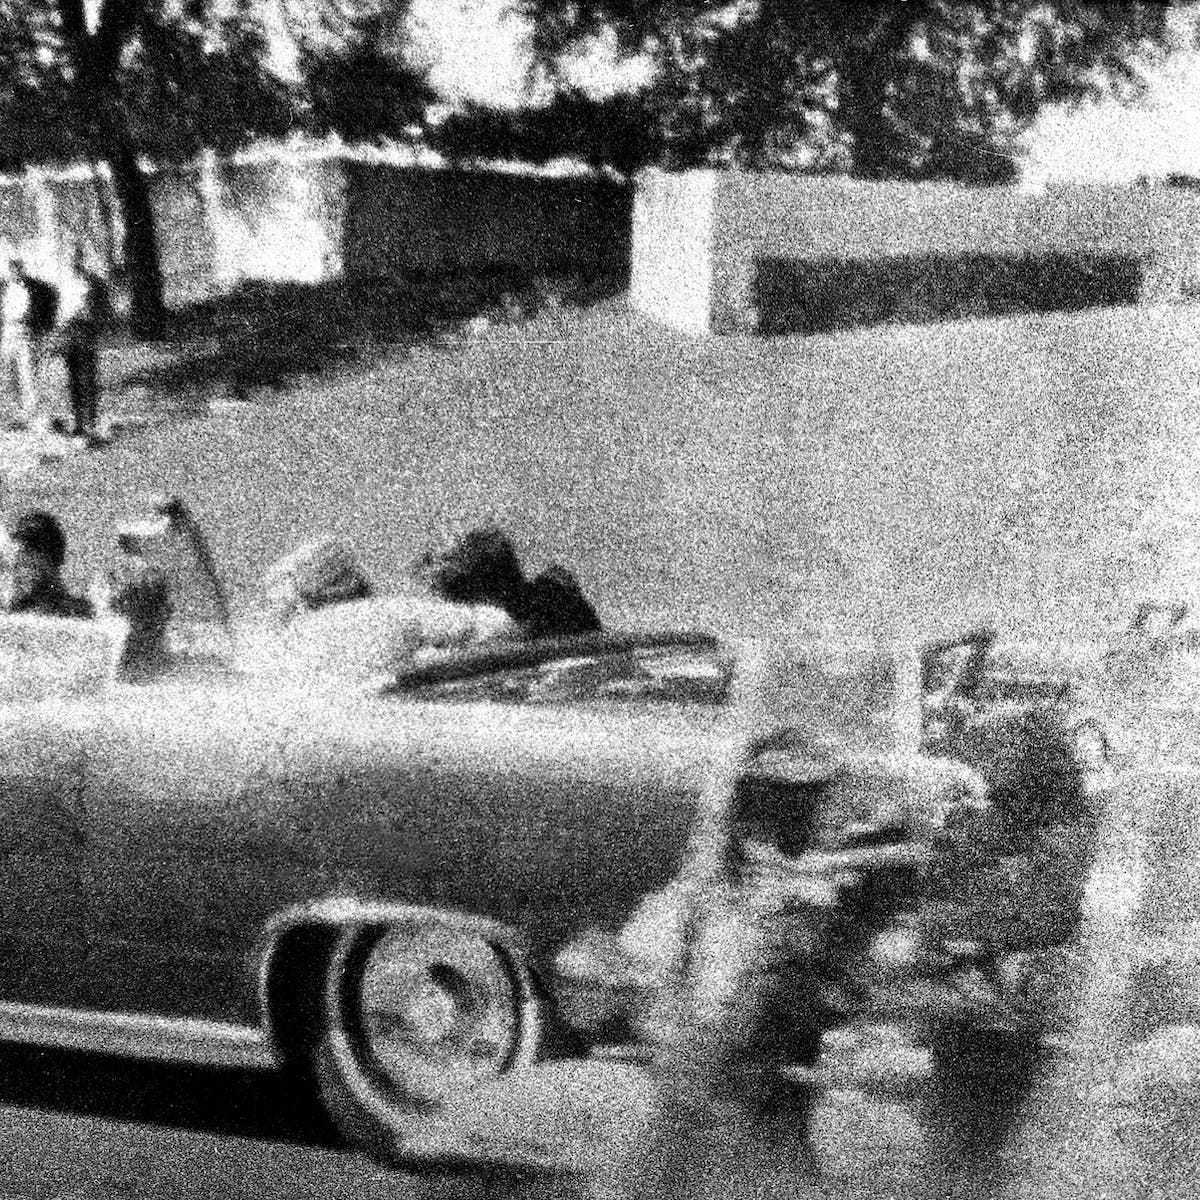 What better forensic science can reveal about the JFK assassination